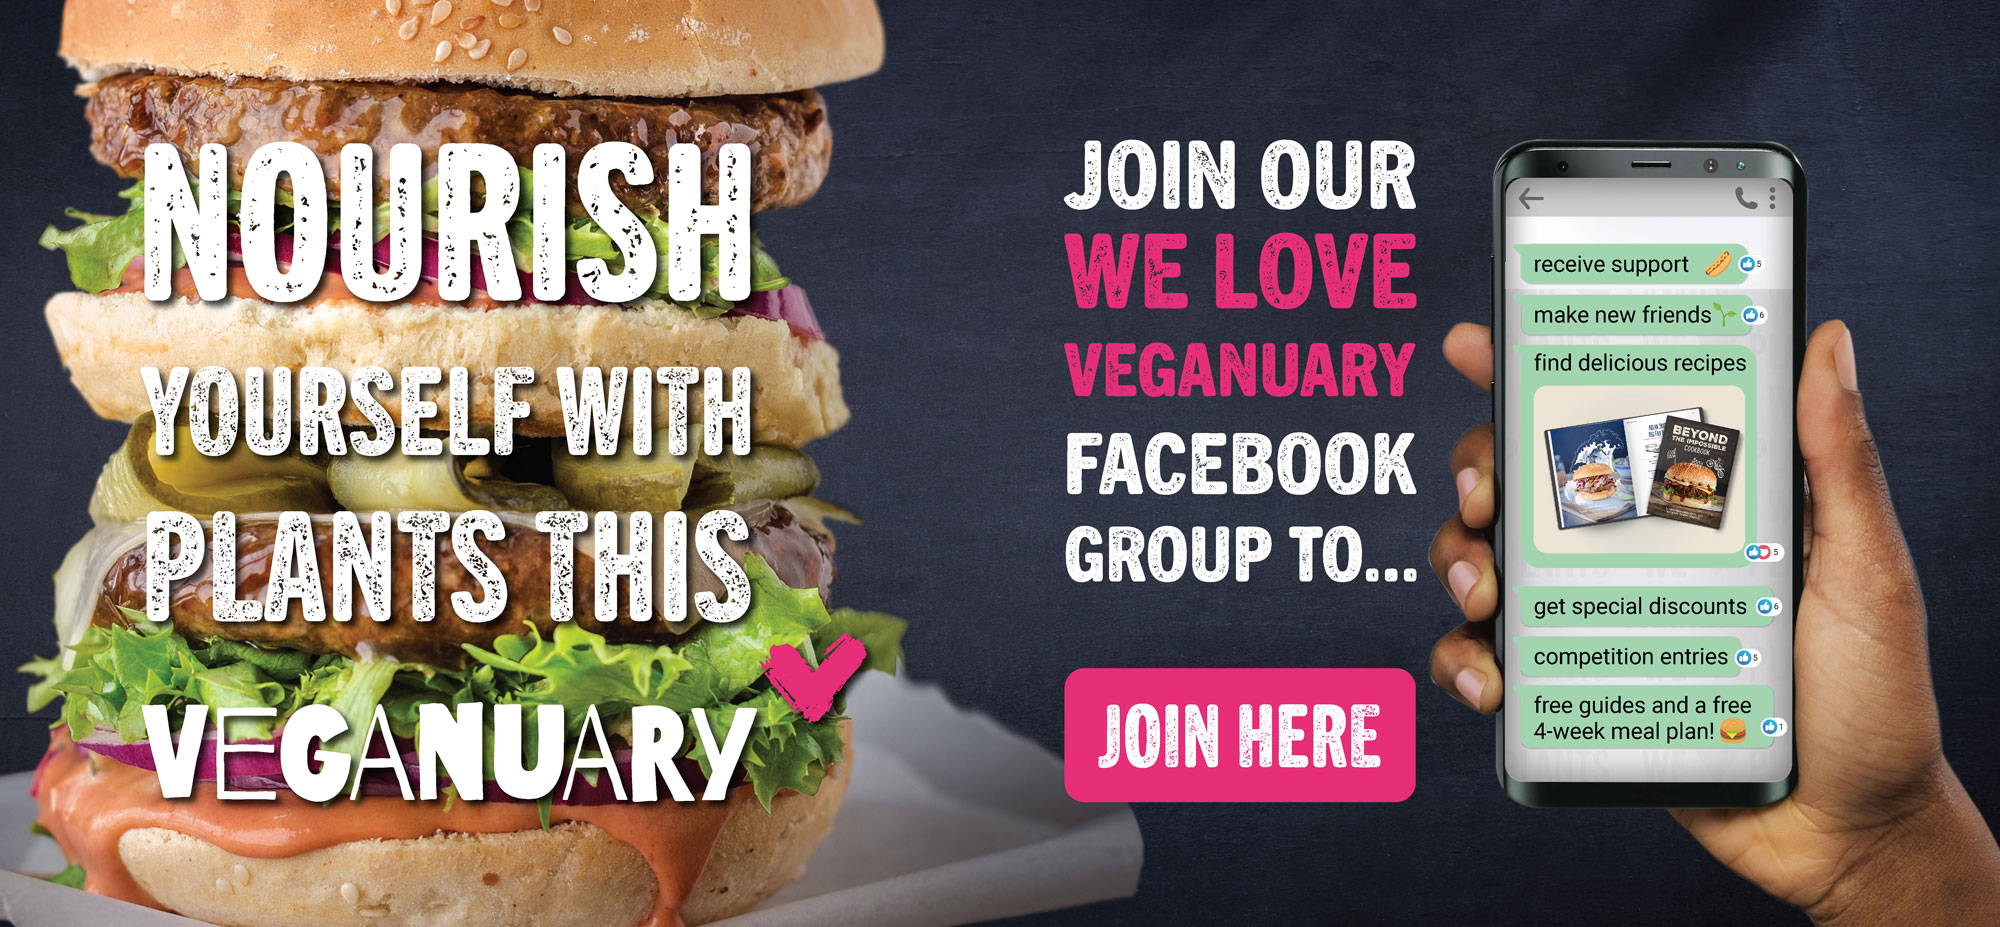 Veganuary banner with double burger